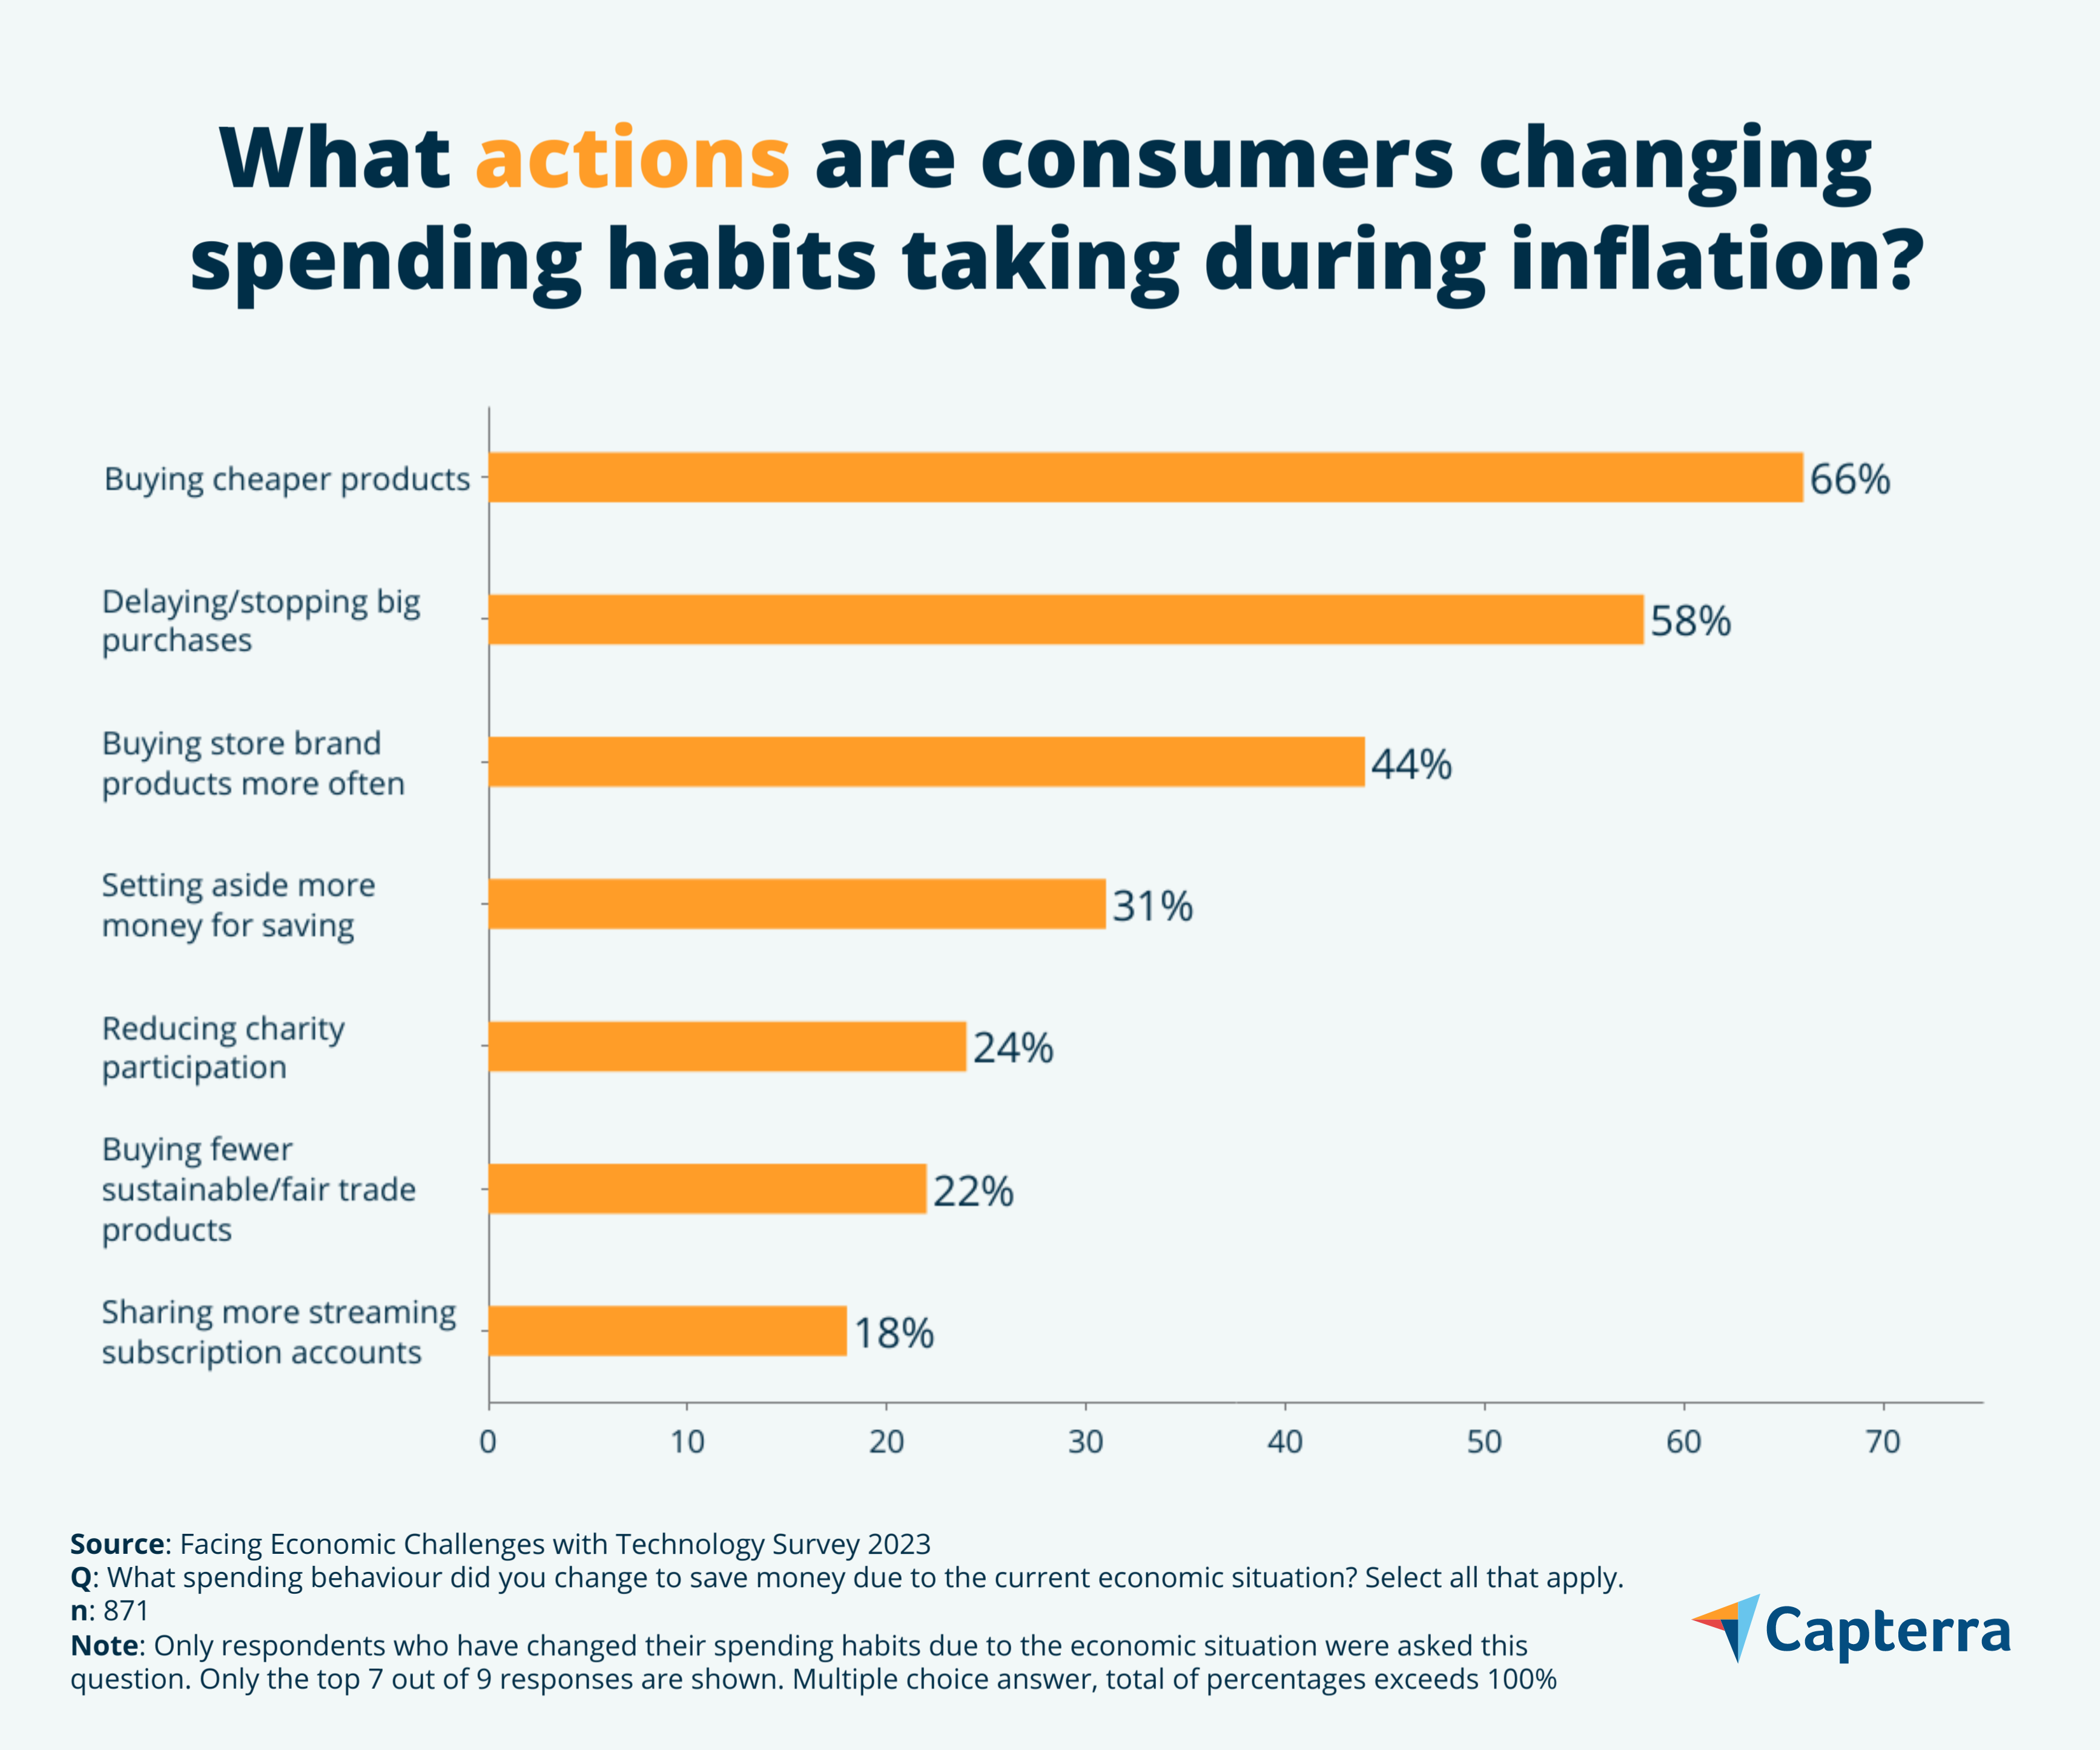 inflation impact on consumer spending habits